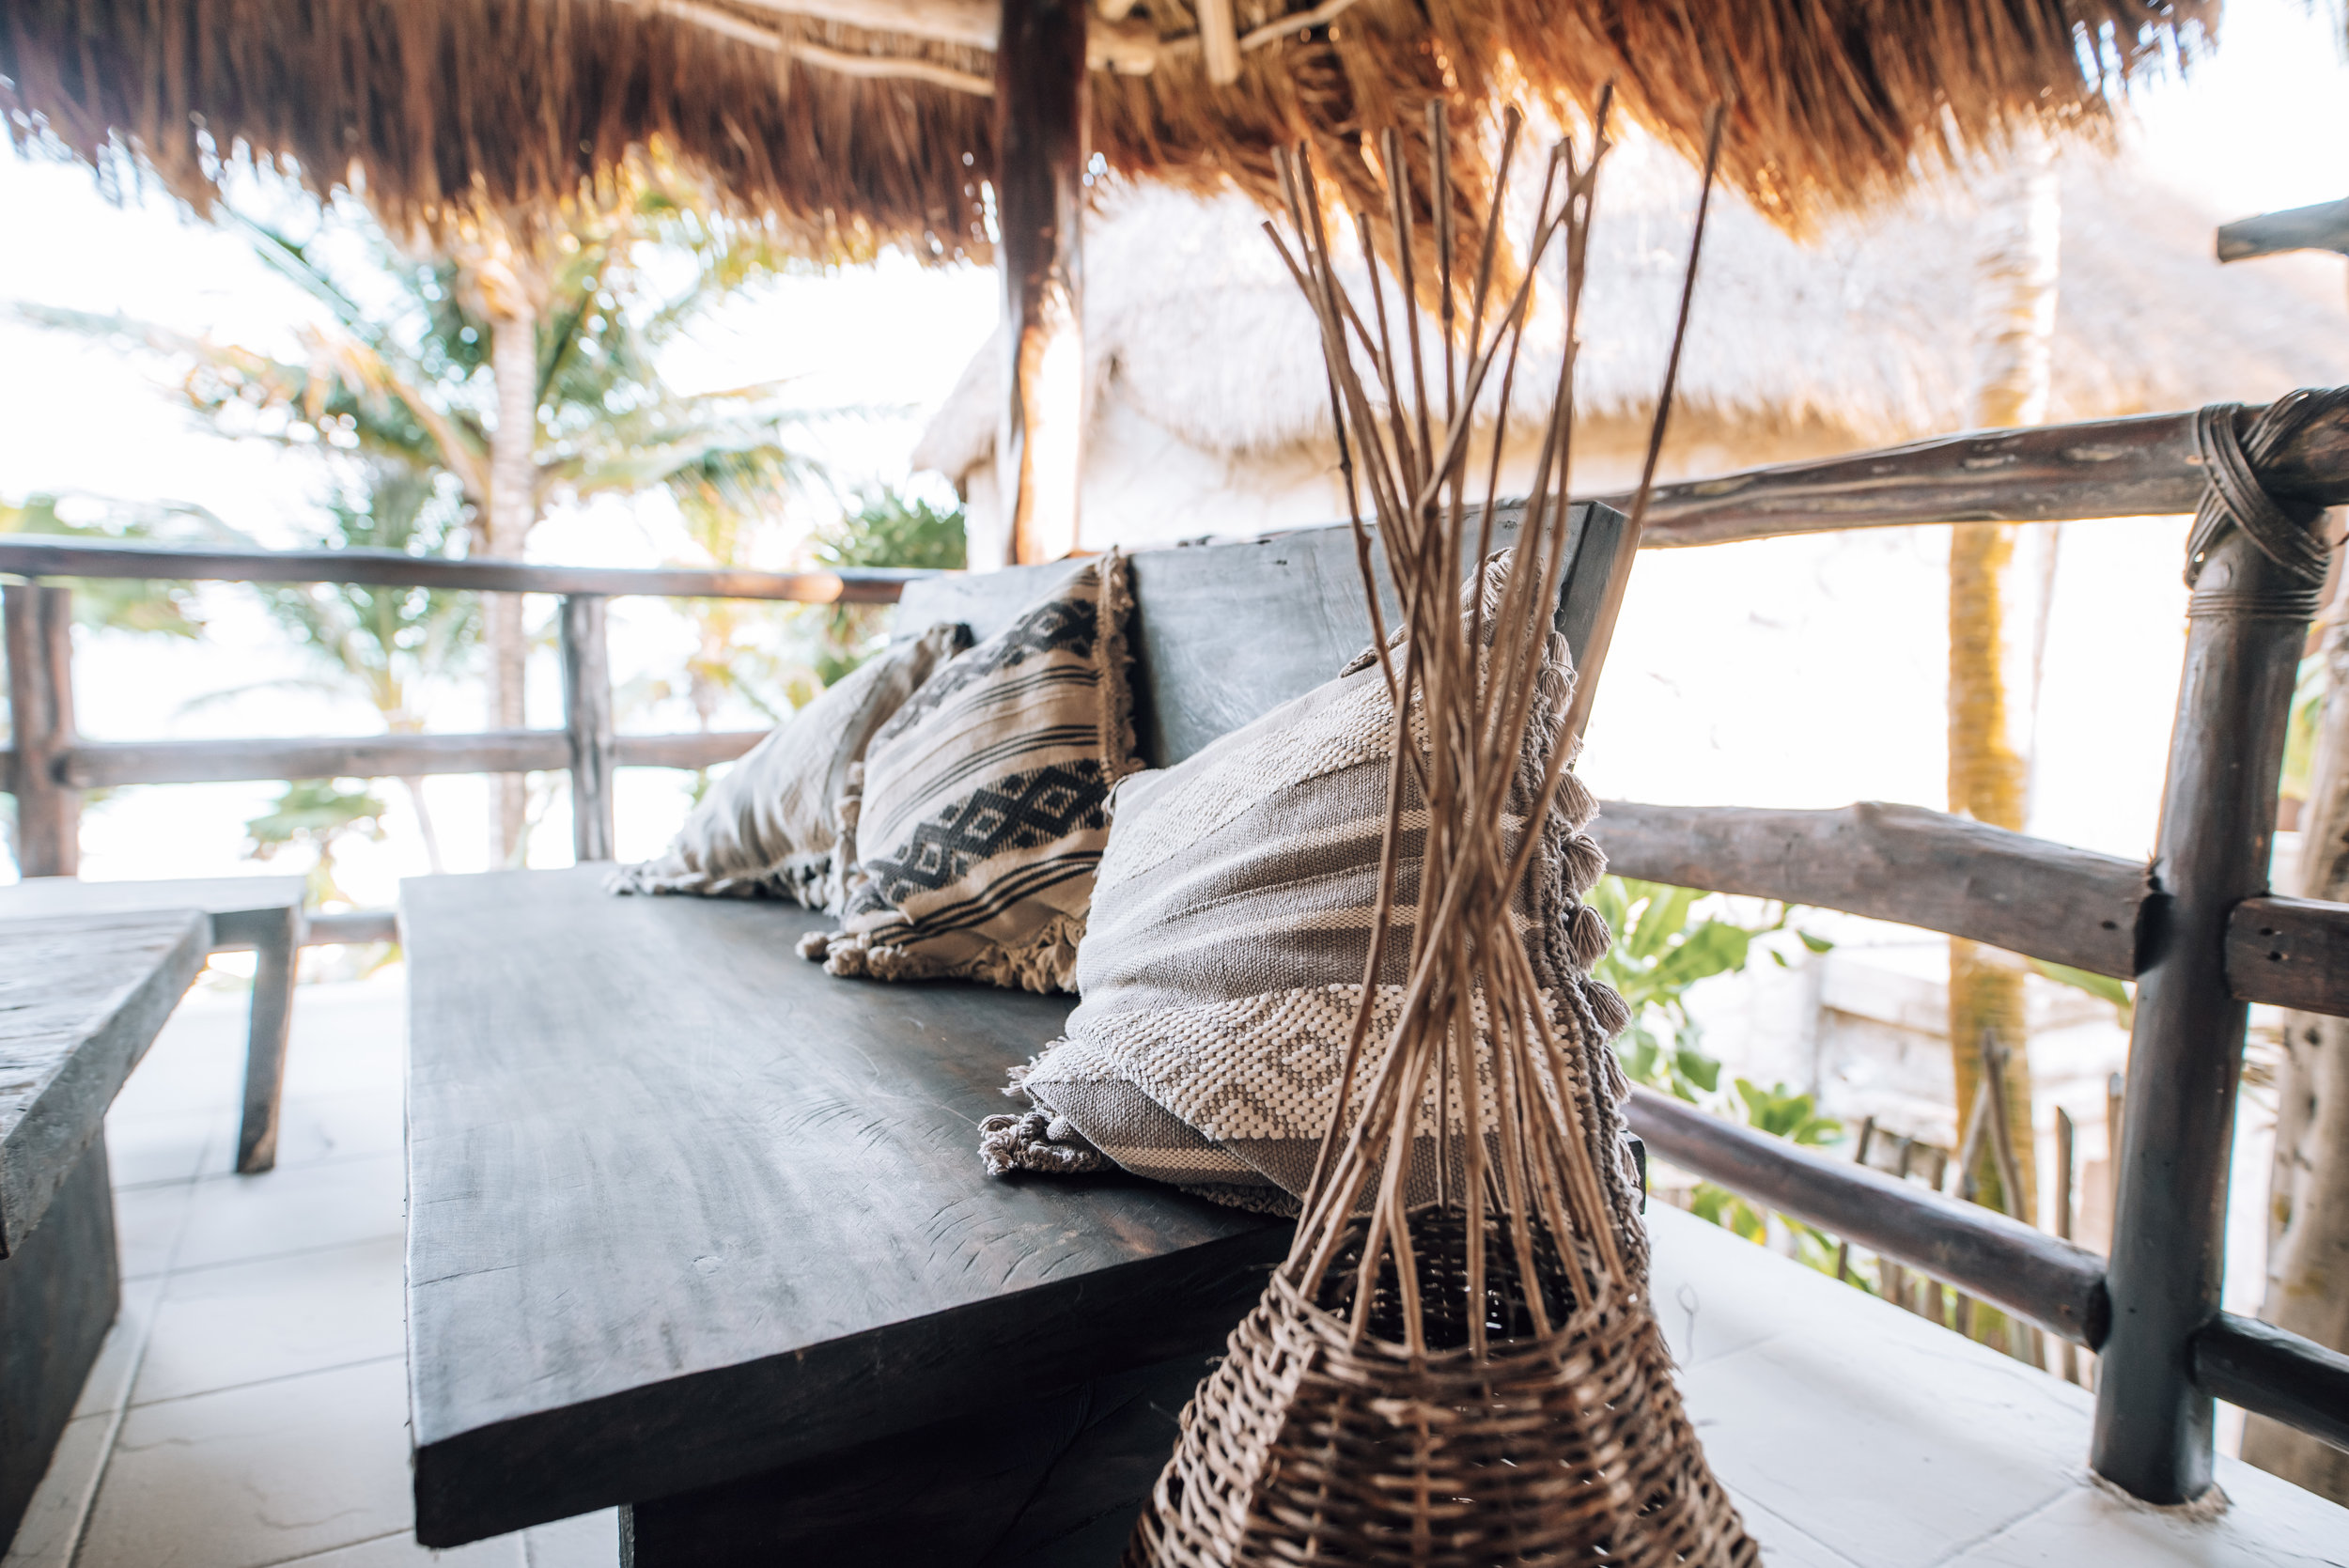  Nest Tulum. Find the best hotels in Tulum for a girls weekend getaway in Tulum. These are the most Instagrammable hotels in Tulum perfect for a girls trip to Tulum. #tulummexico #tulumhotels | Tulum hotels design | Tulum hotels luxury | best hotels 